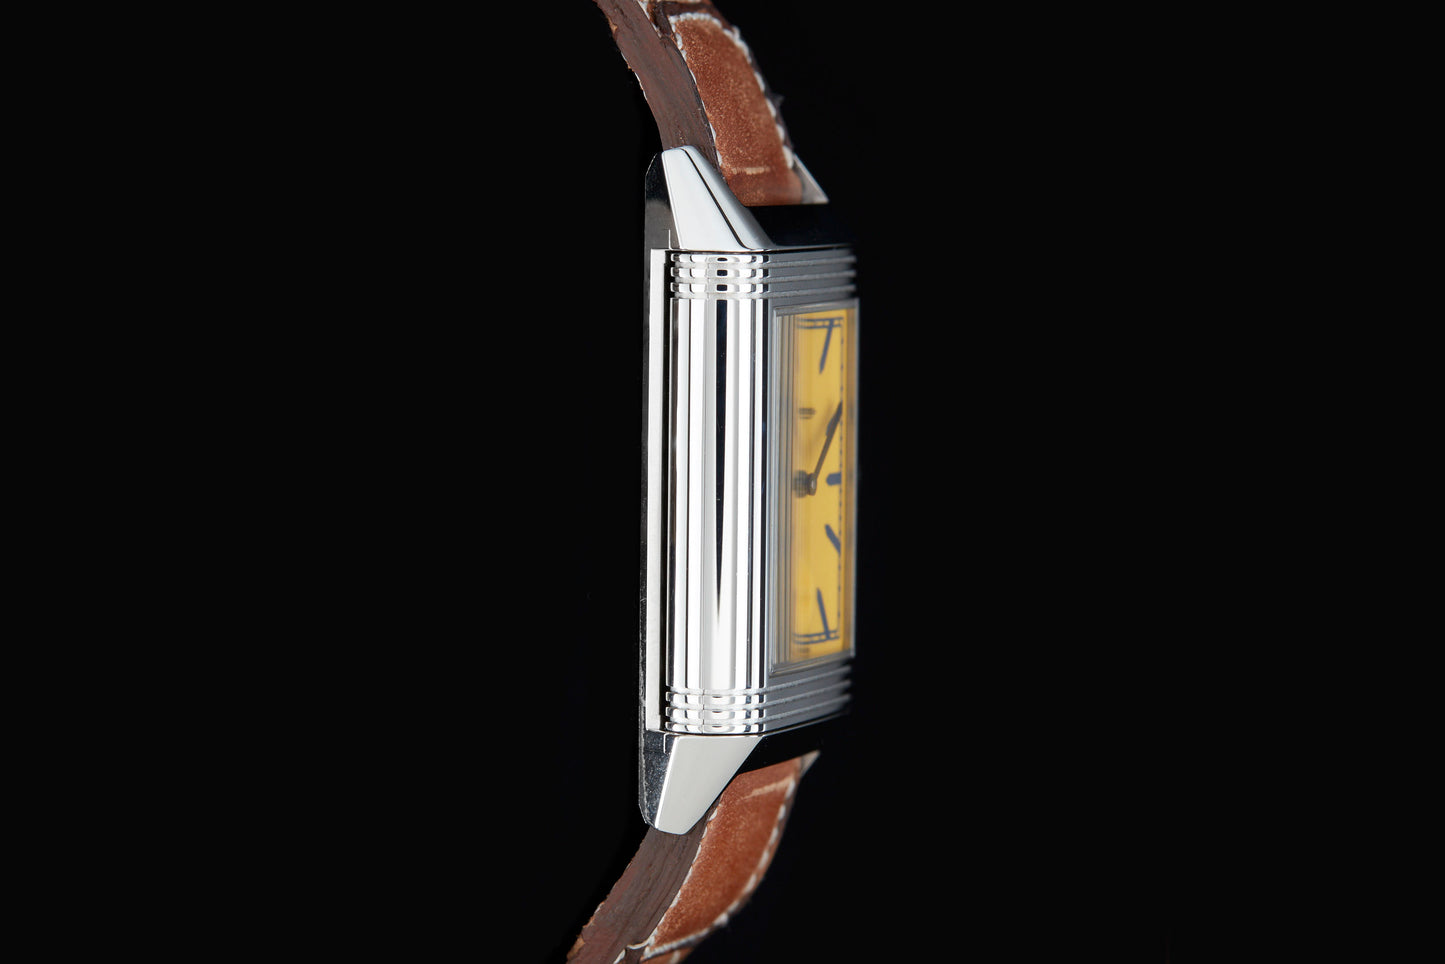 Jaeger-LeCoultre Reverso 1931 "King Rama IX of Thailand" Limited Edition